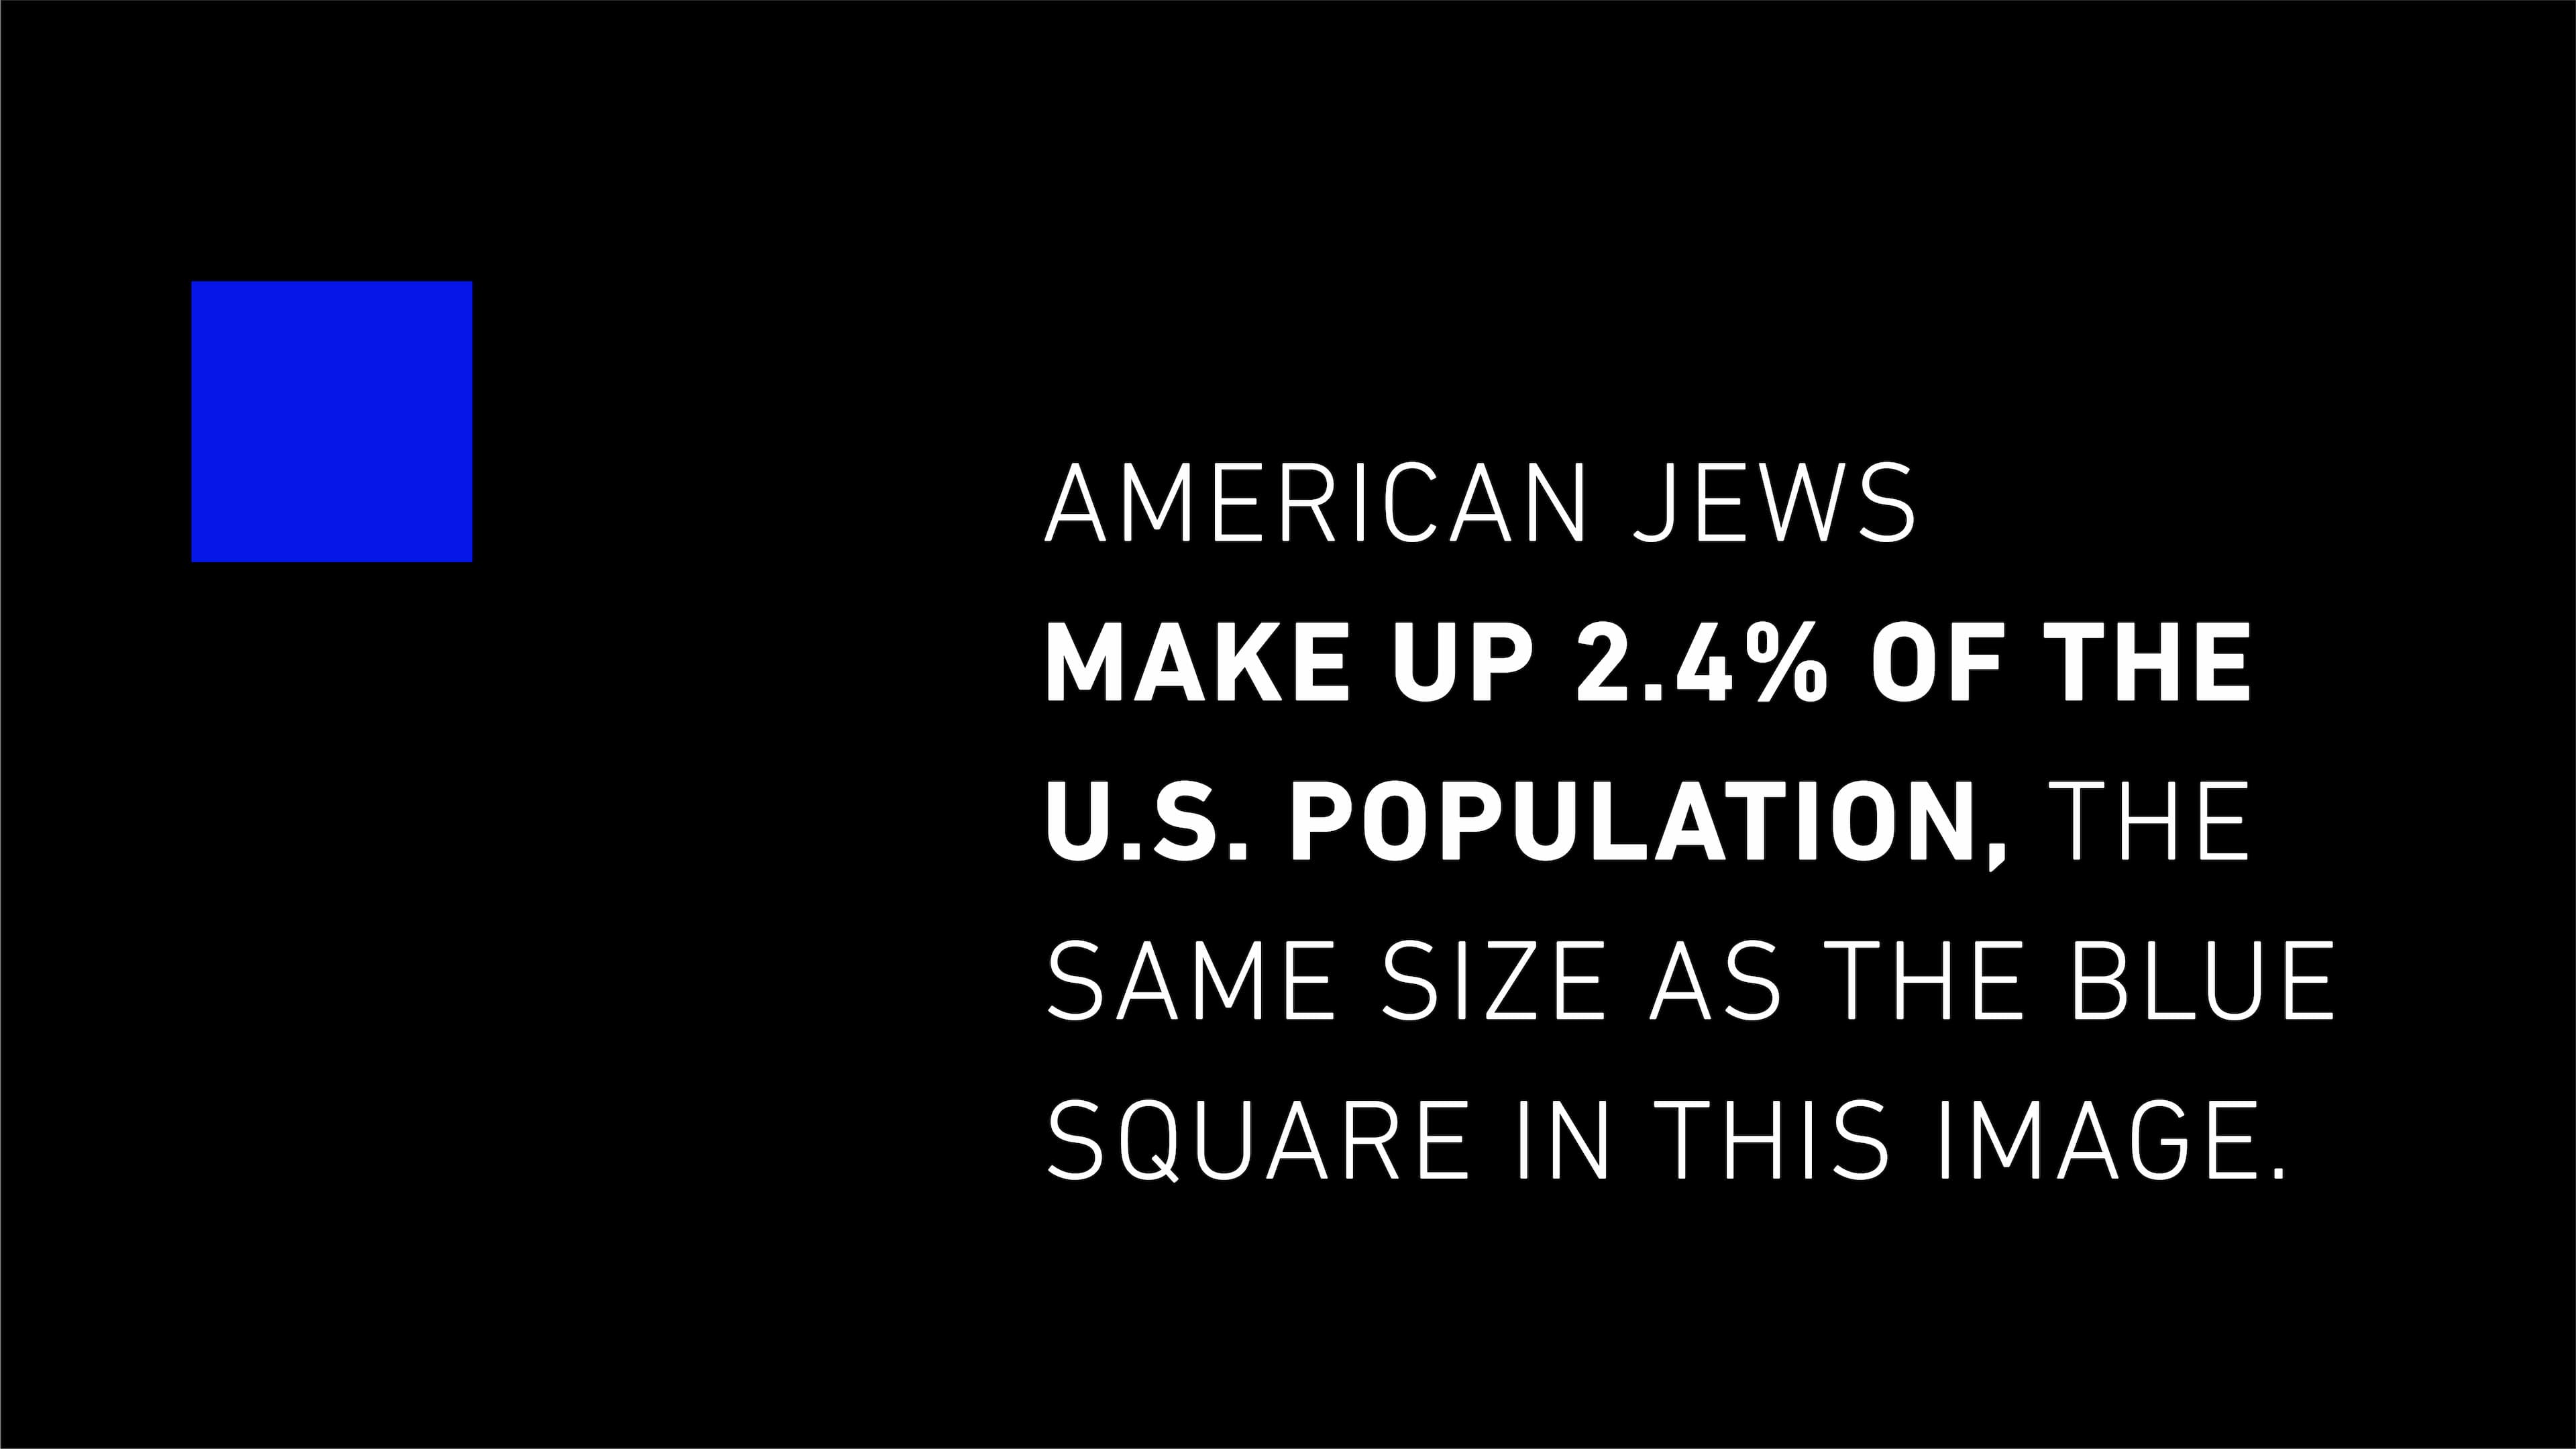 Image has a small blue square in the upper left corner of the image. Text reads: American Jews make up 2.4% of the U.S. population, the same size as the blue square in this image.